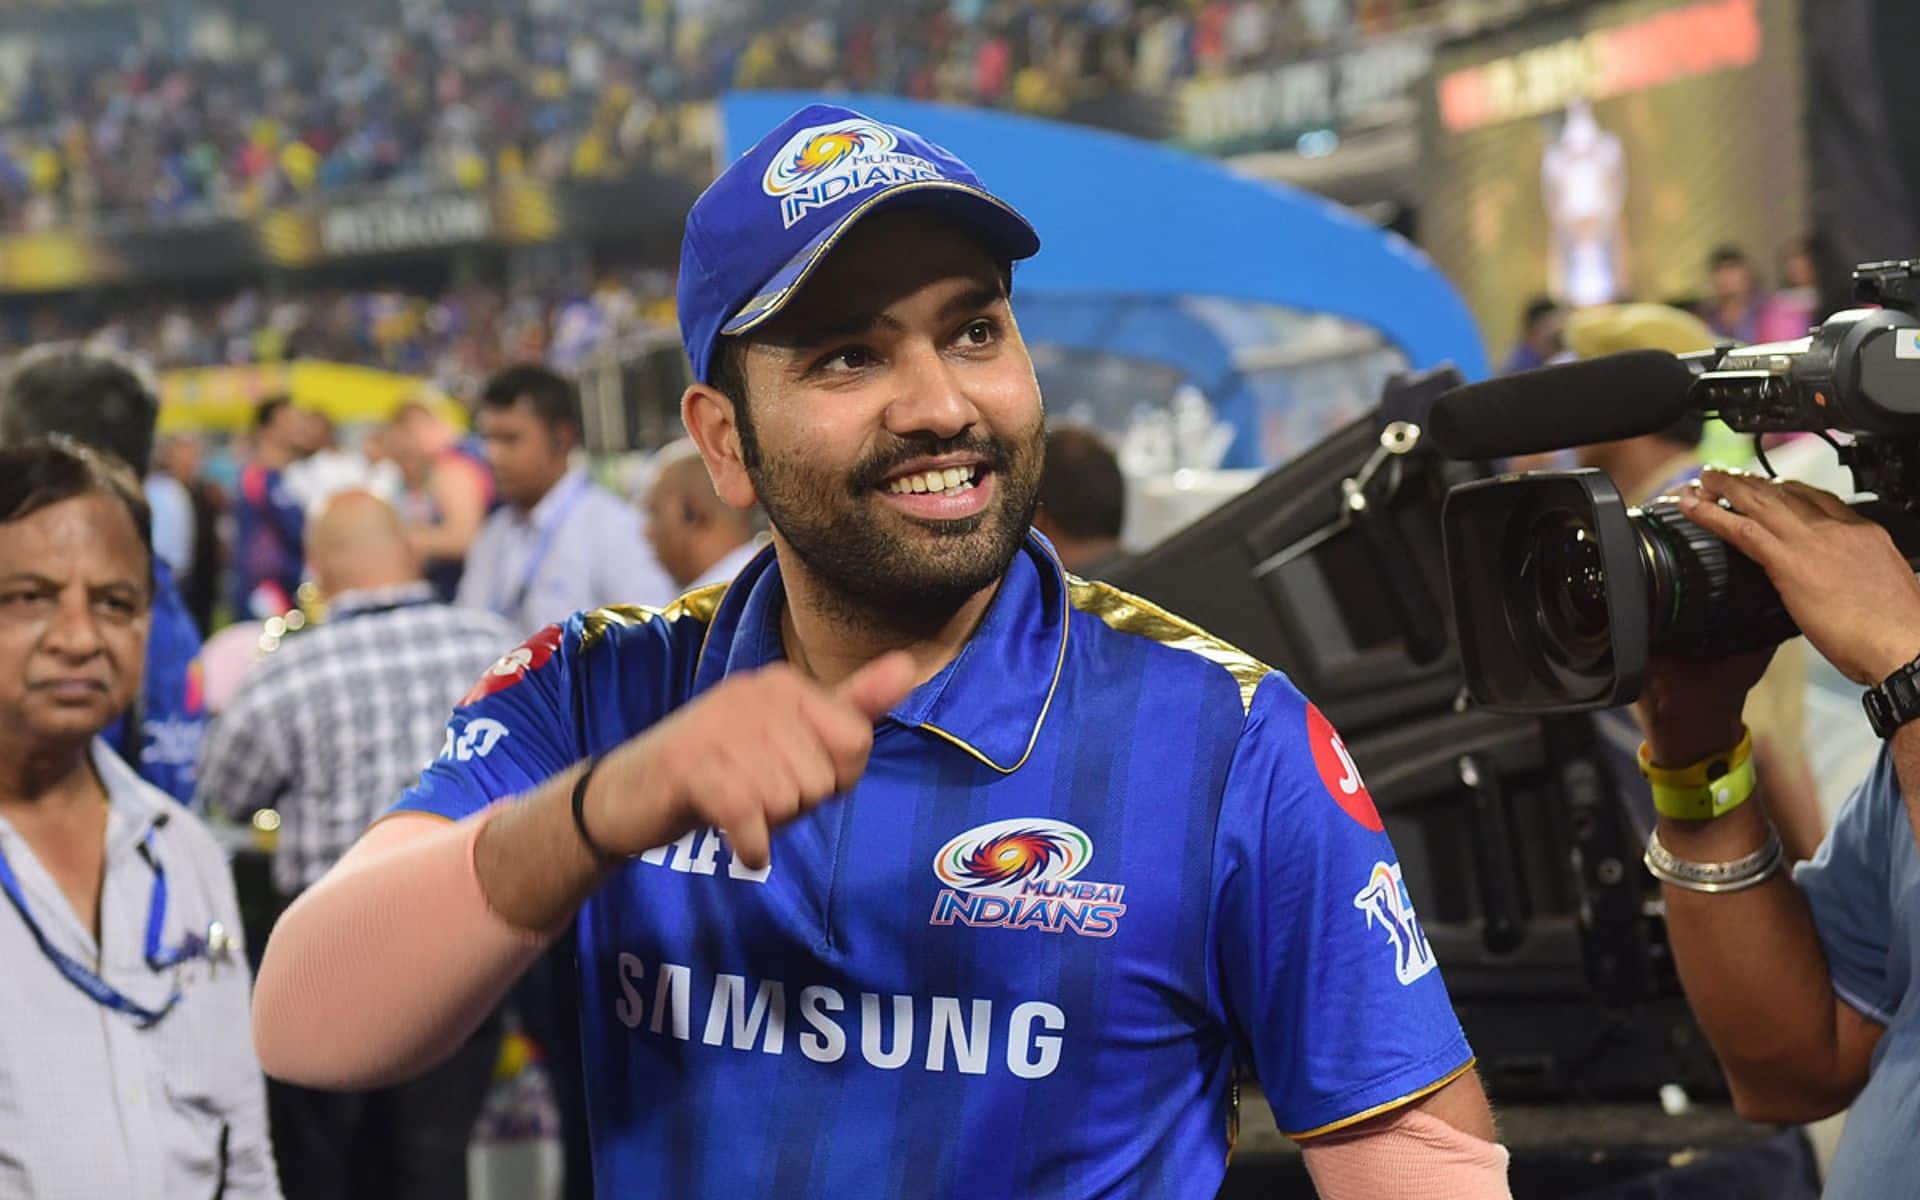 Rohit Sharma won the IPL title at the age of 26. (x.com)